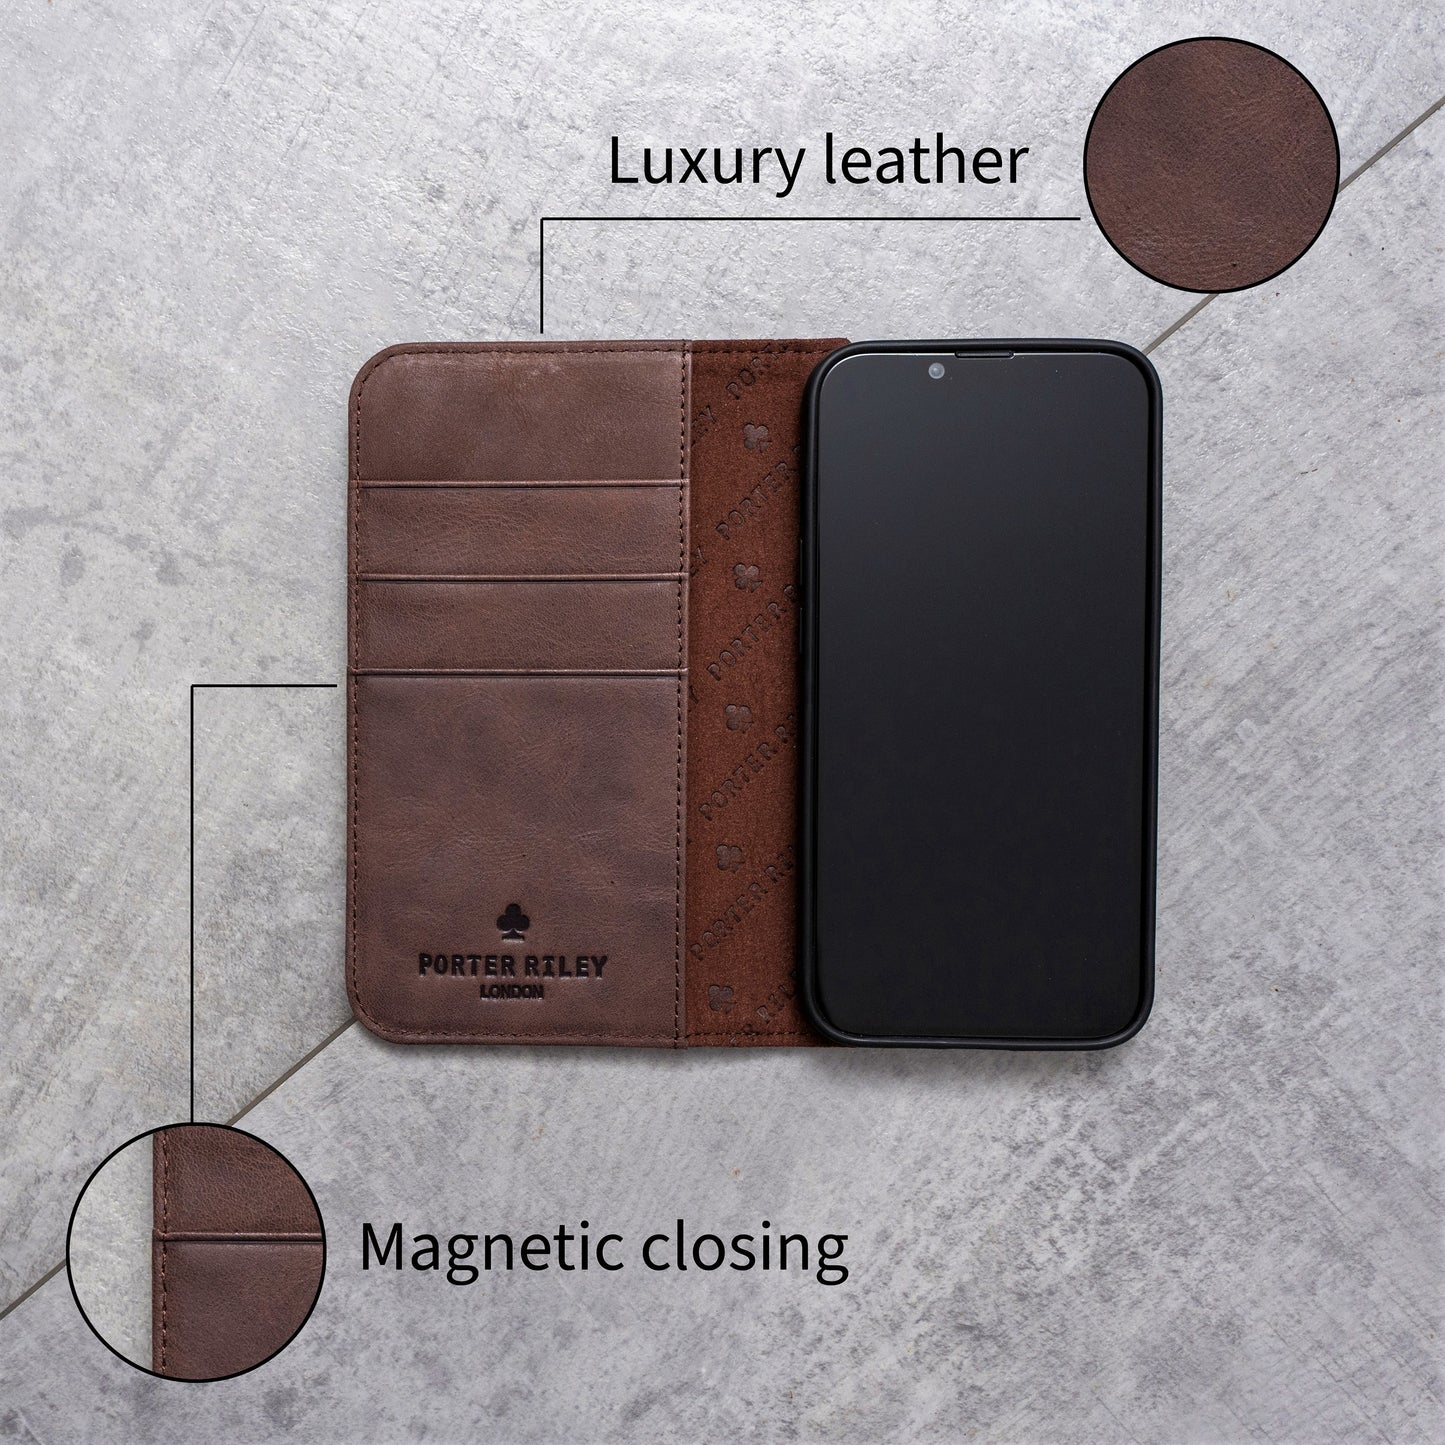 Samsung Galaxy S10 Leather Case. Premium Slim Genuine Leather Stand Case/Cover/Wallet (Chocolate Brown)